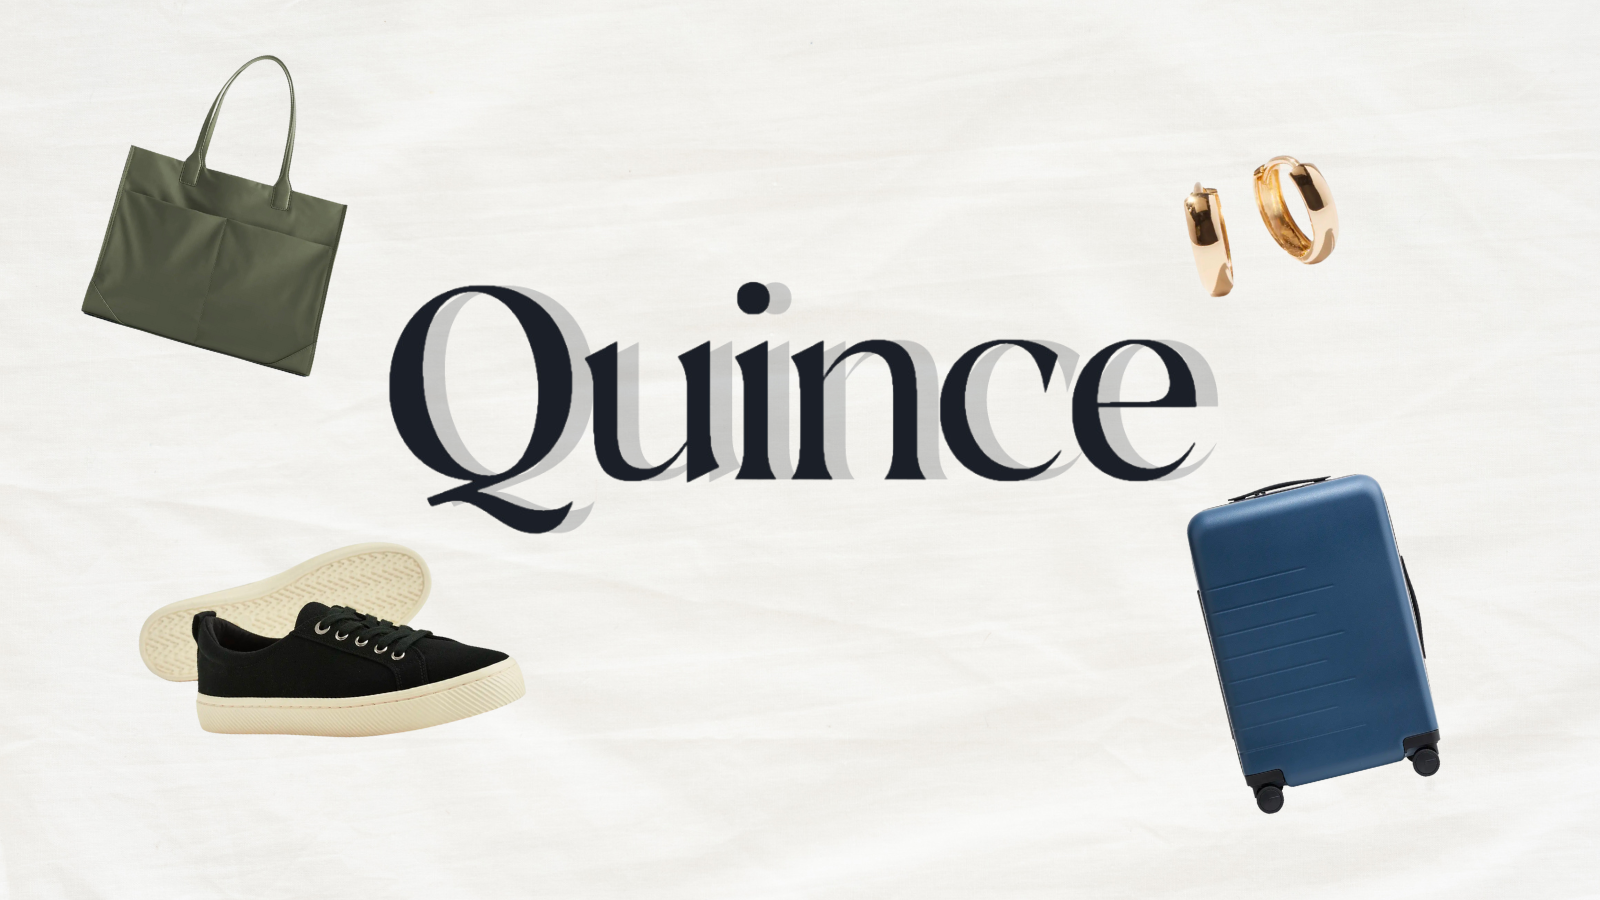 Quince is My One-Stop Shop for Luxury Basics